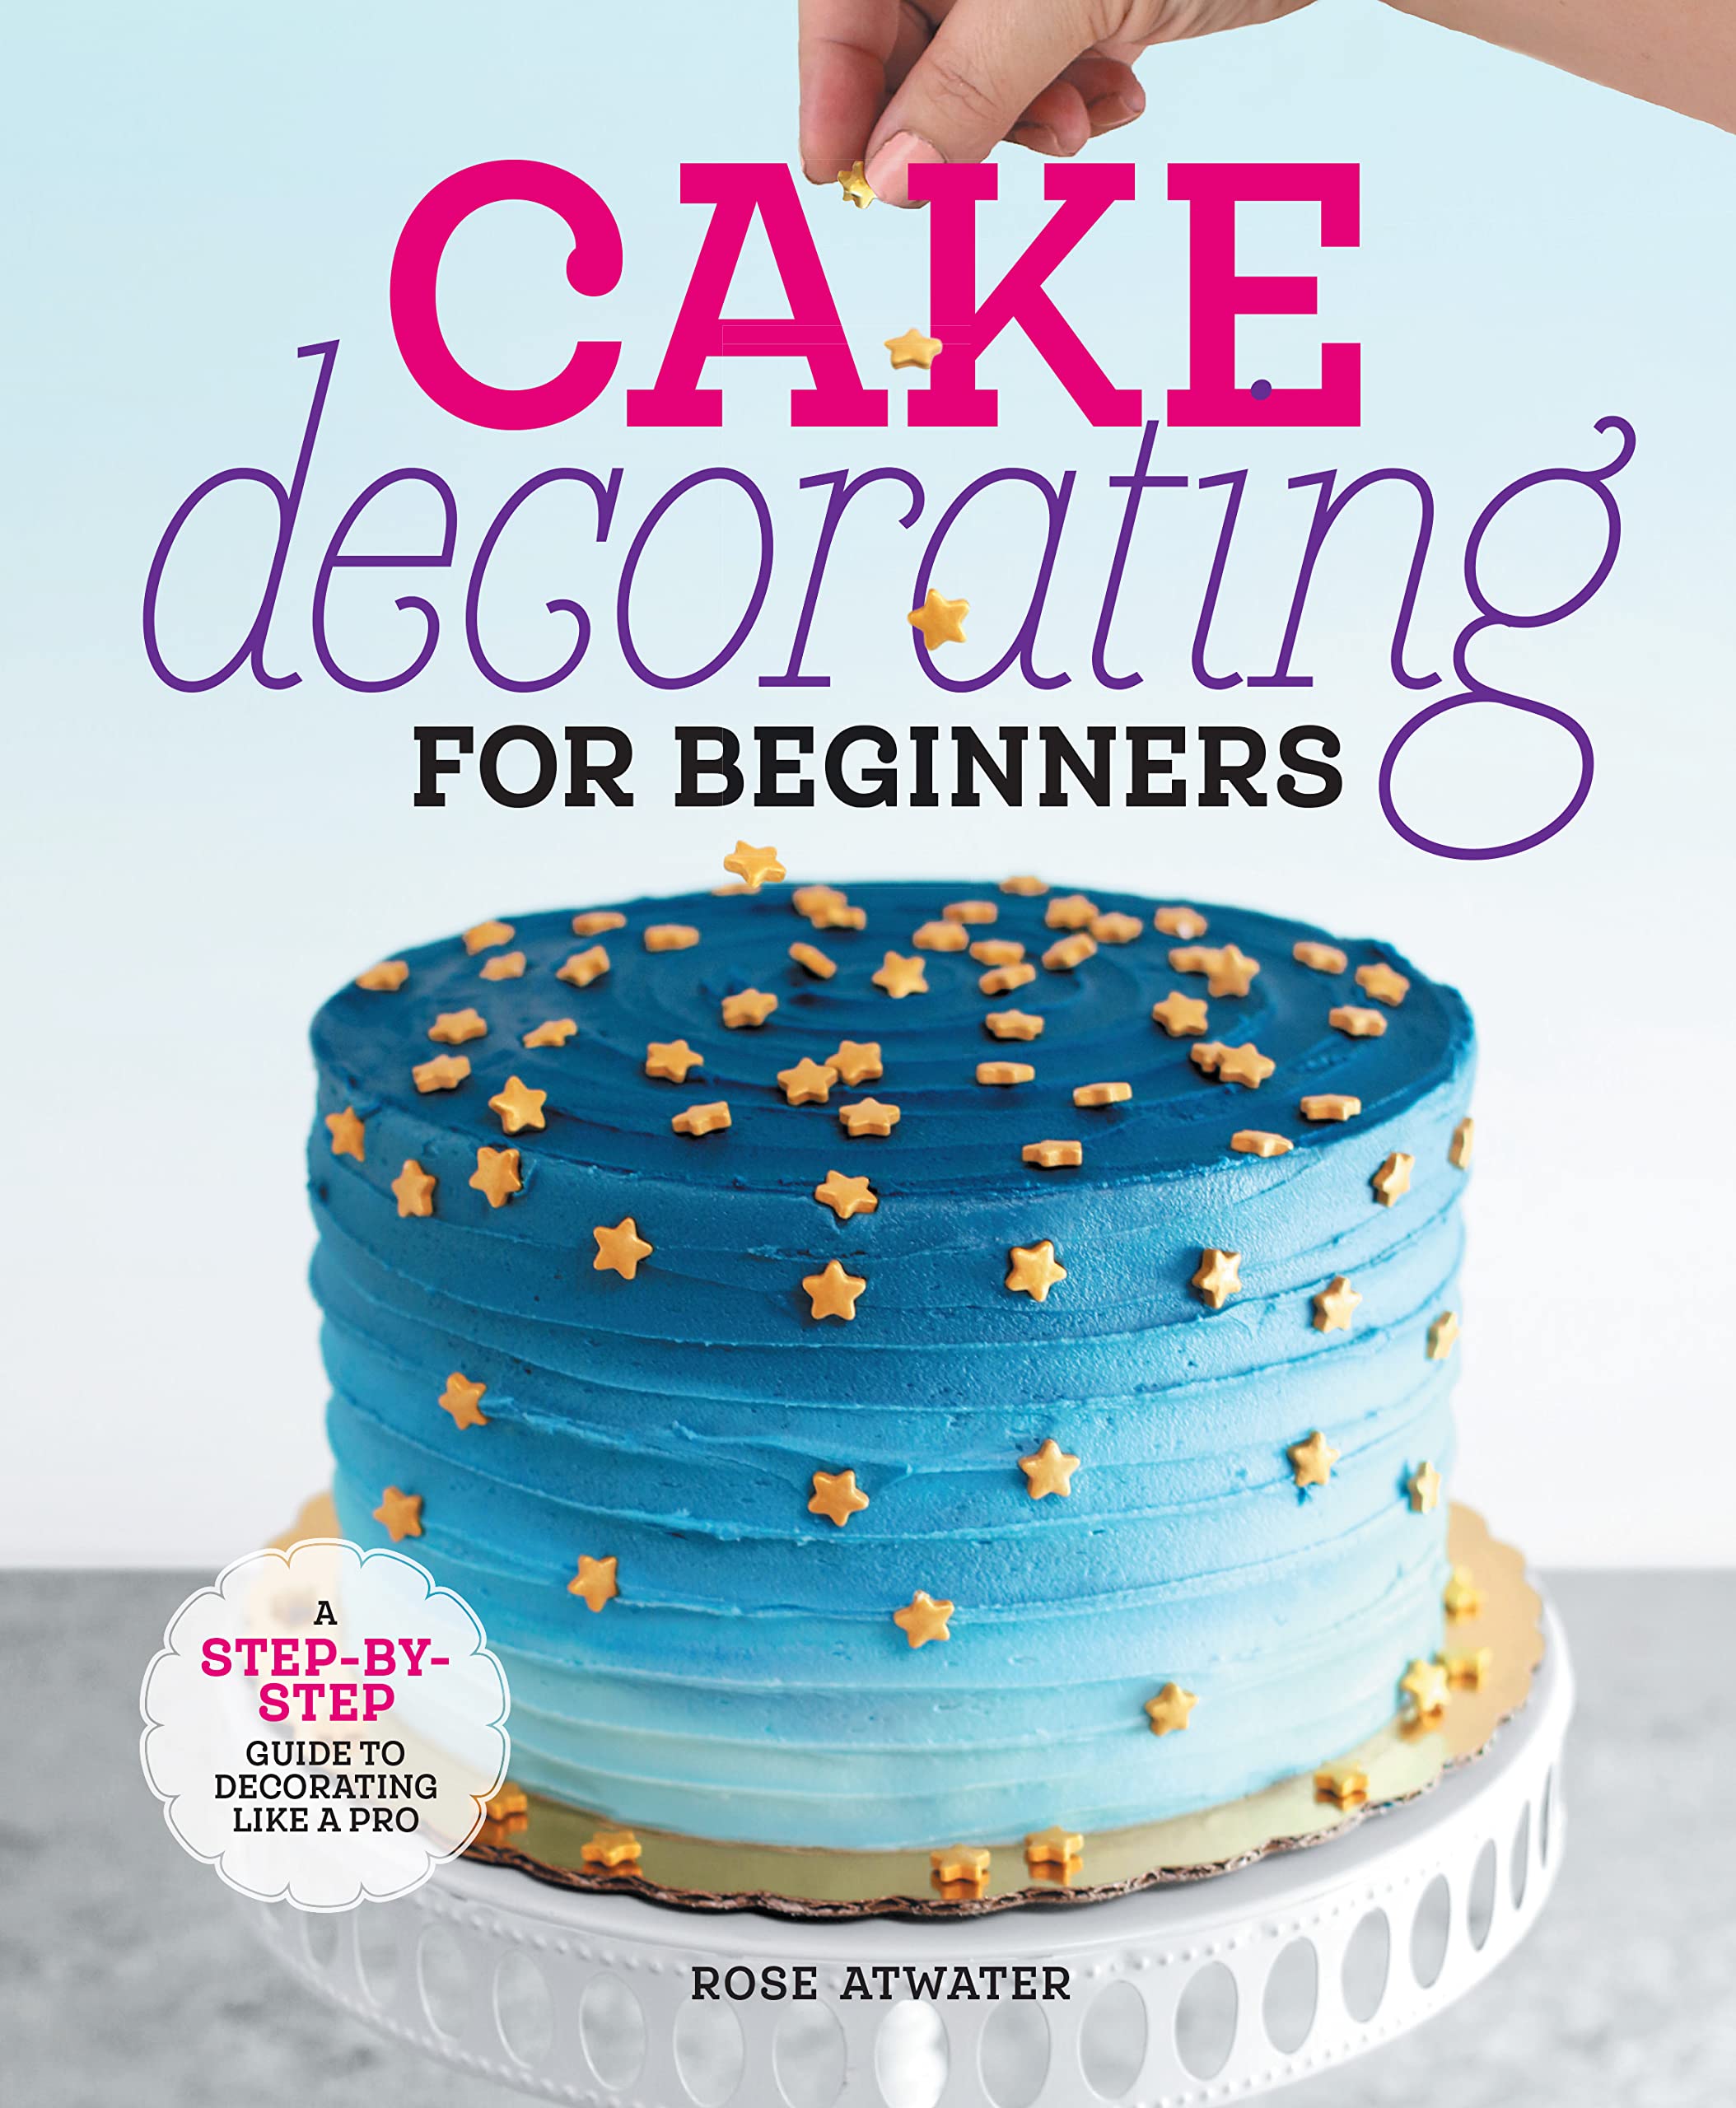 10 RELIABLE WEBSITES TO SHOP FOR CAKE DECORATING SUPPLIES / USA - YouTube